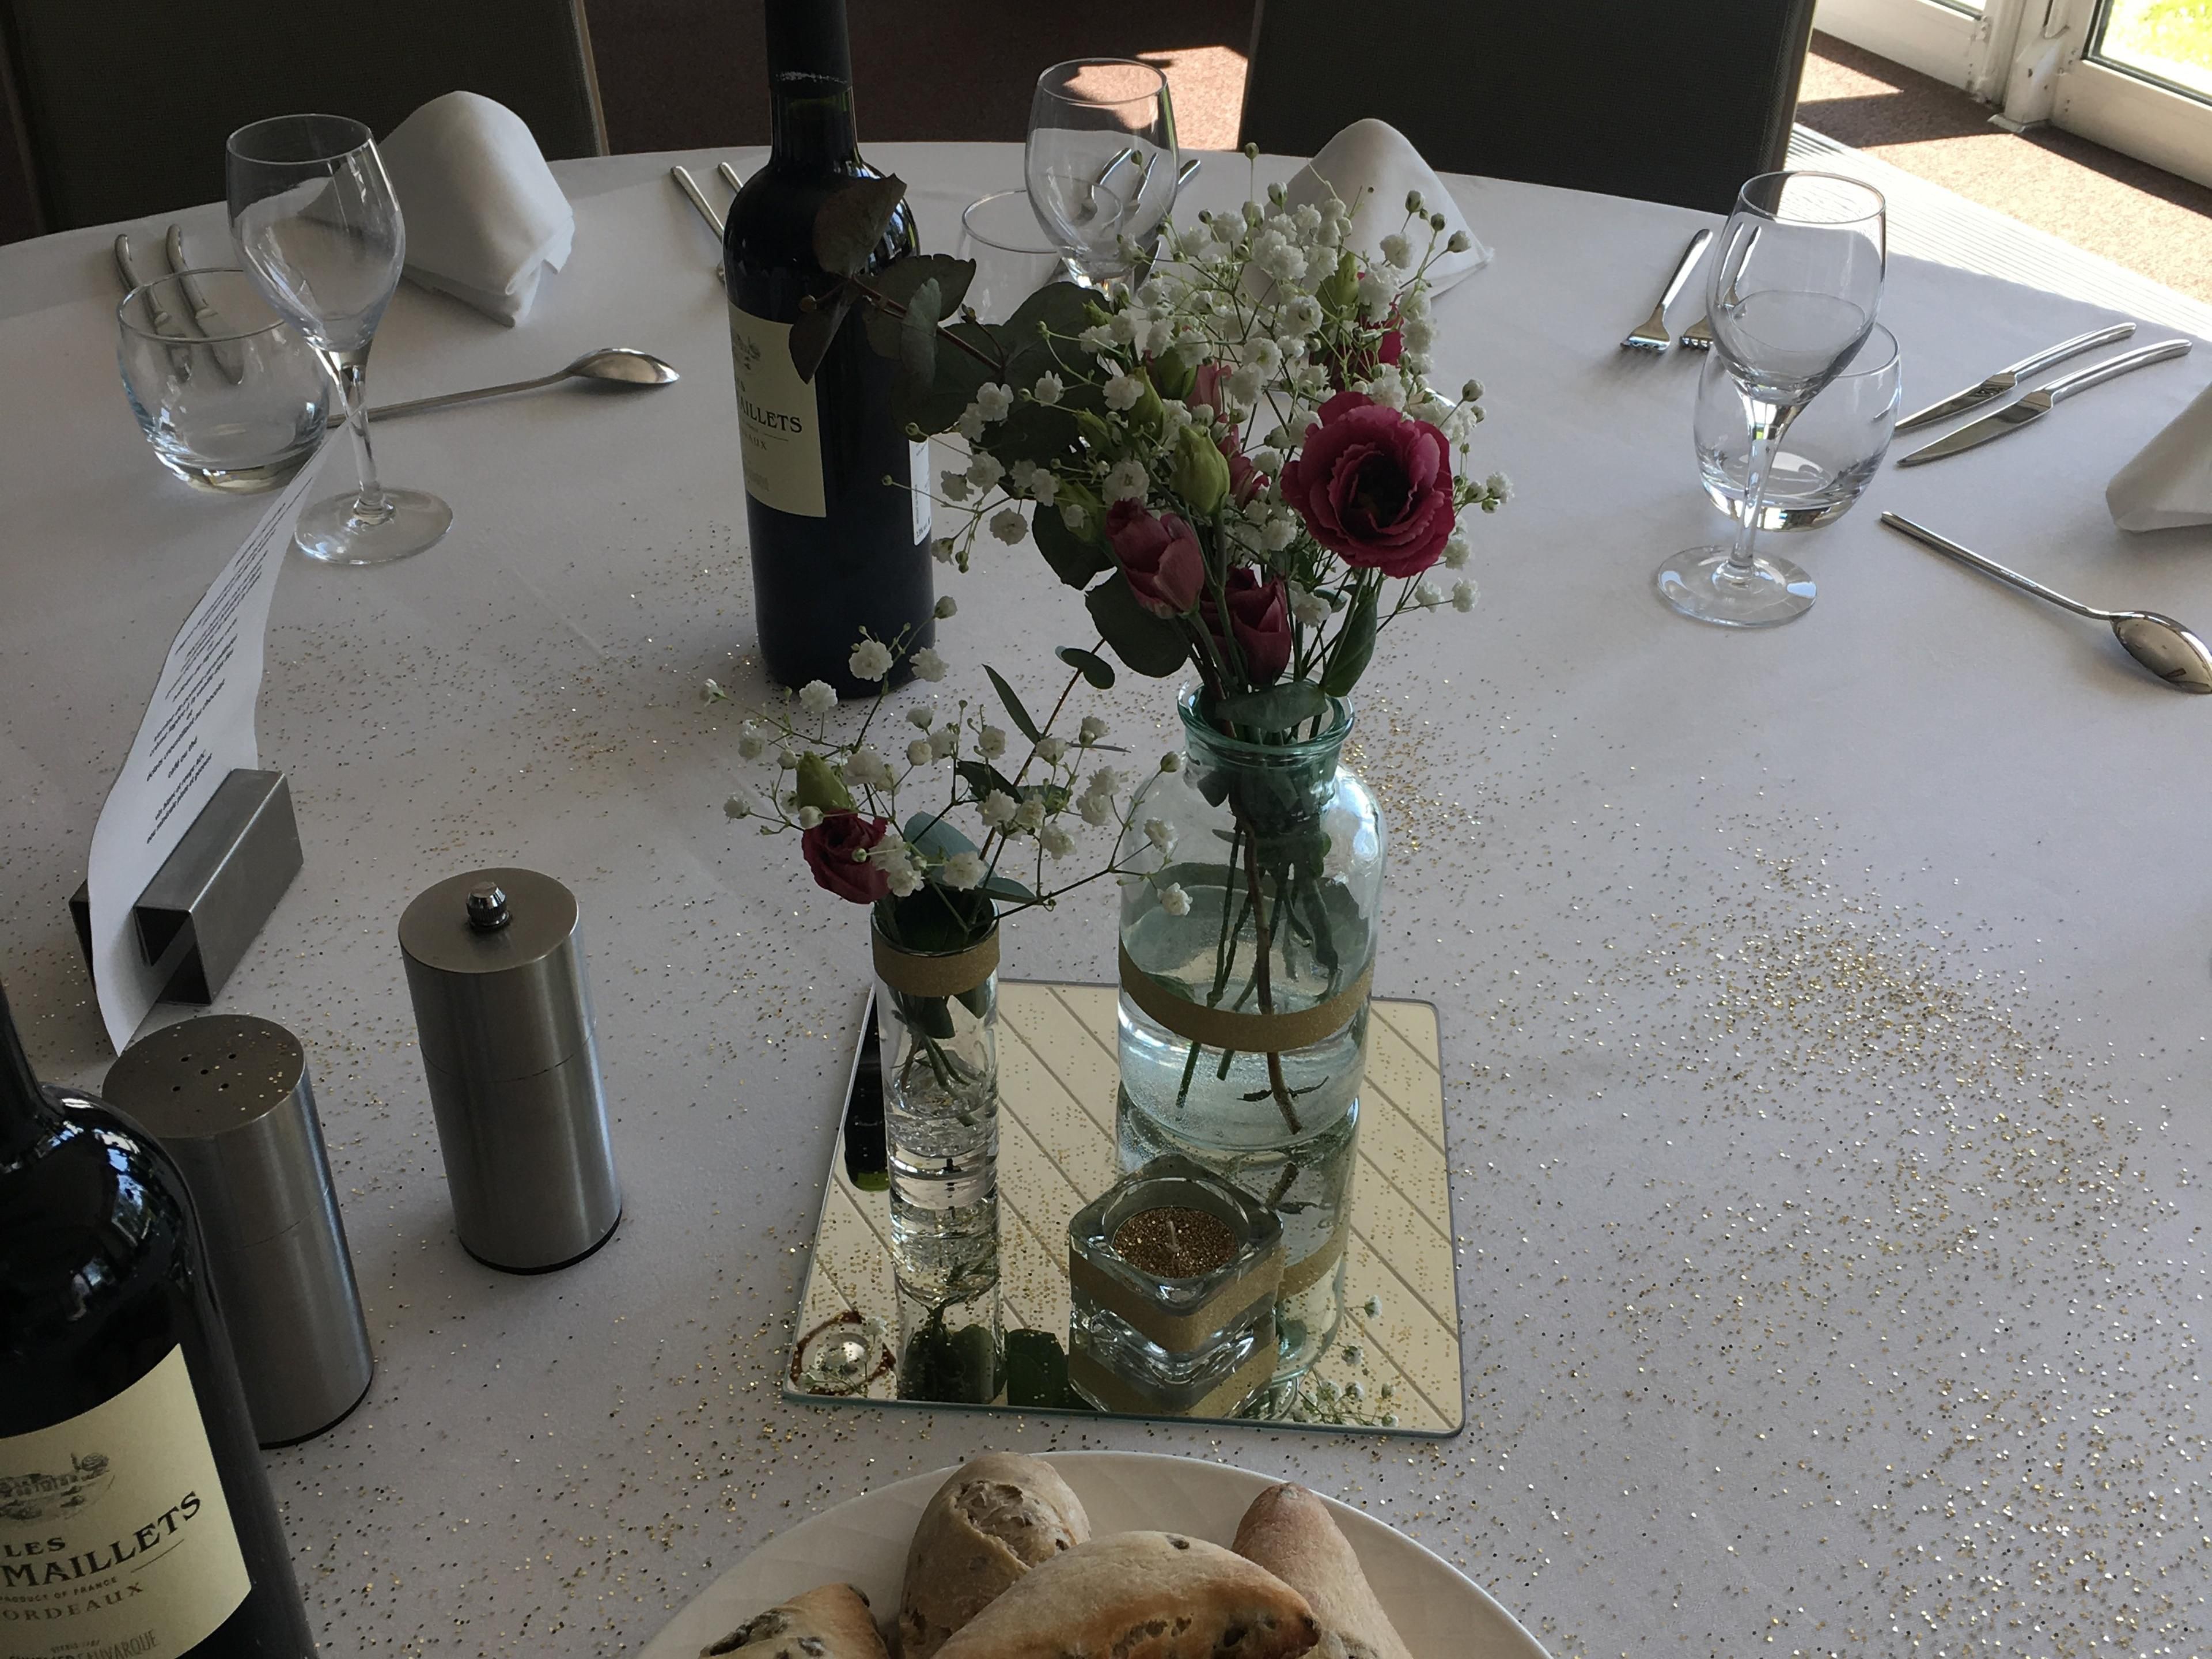 Host an intimate event for up to 120 guests in dinner set up with dancing space or invite 200 people for a cocktail reception and enjoy our great park. A wedding to organize? You'll get your honeymoon offered.